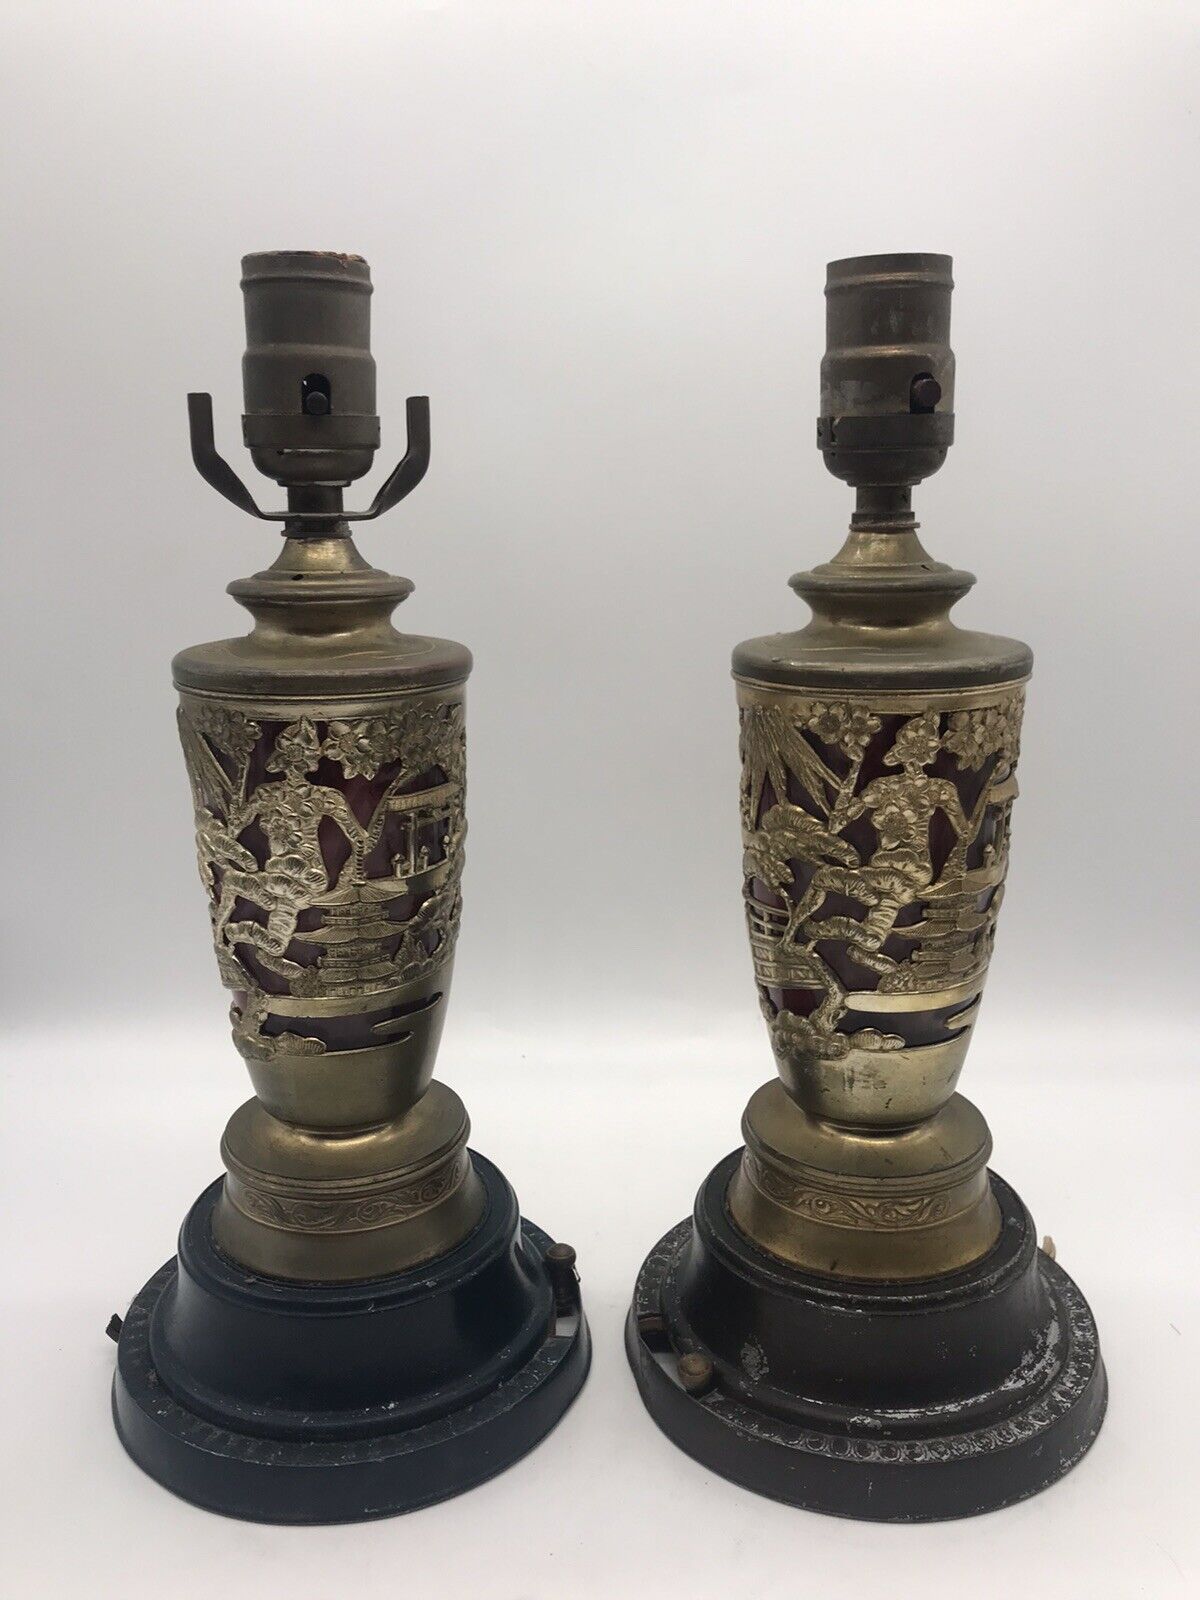 RARE 2 UNIQUE BRASS/METAL TWO TONE RUBY RED LAMPS WITH MUSIC BOX BUILT IN